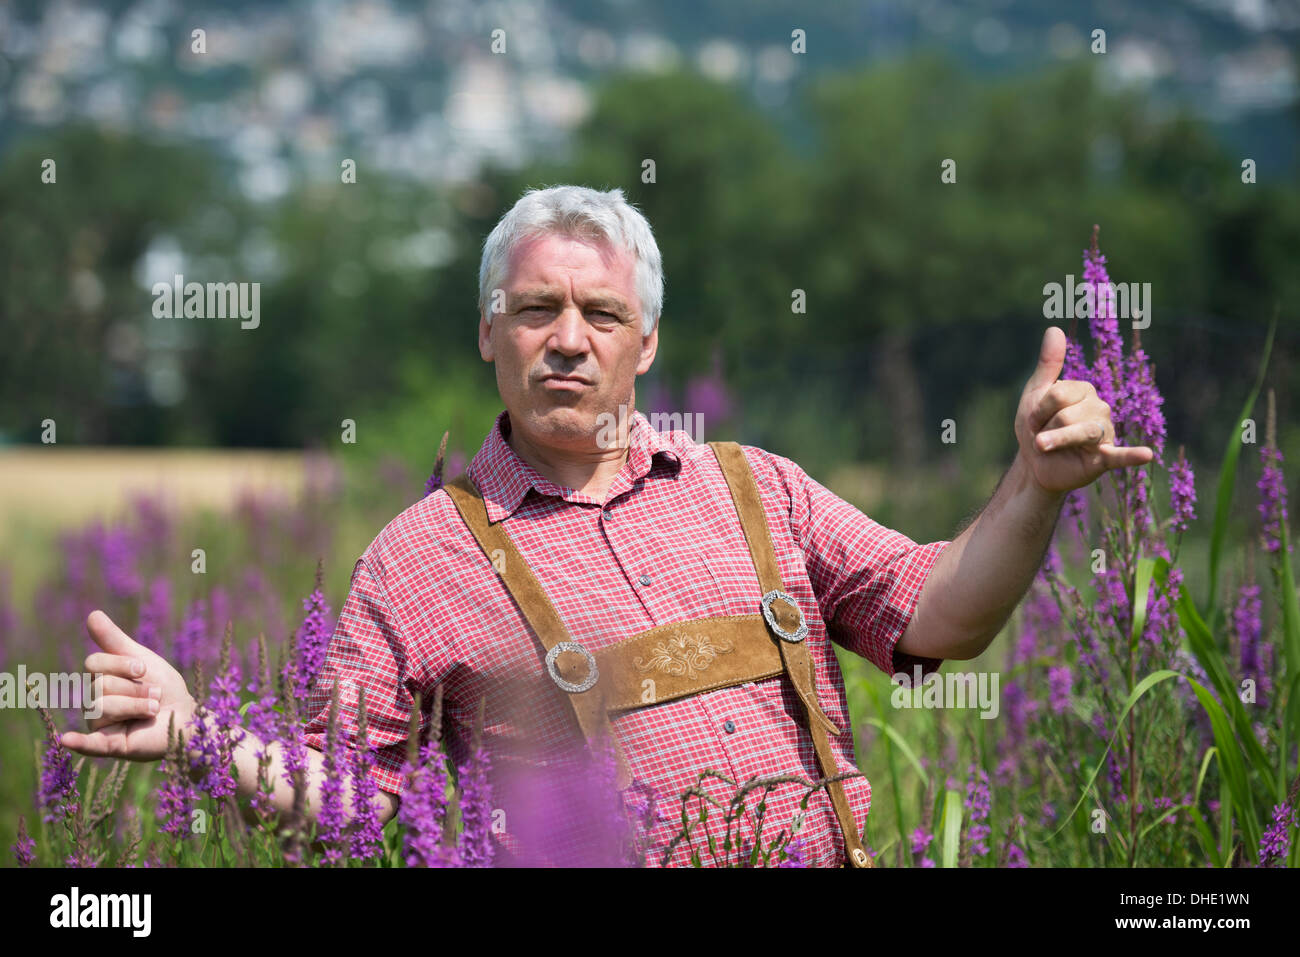 A Man Standing In A Field With Purple Blossoms Giving The Shaka Sign With  His Hands; Locarno, Ticino, Switzerland Stock Photo - Alamy